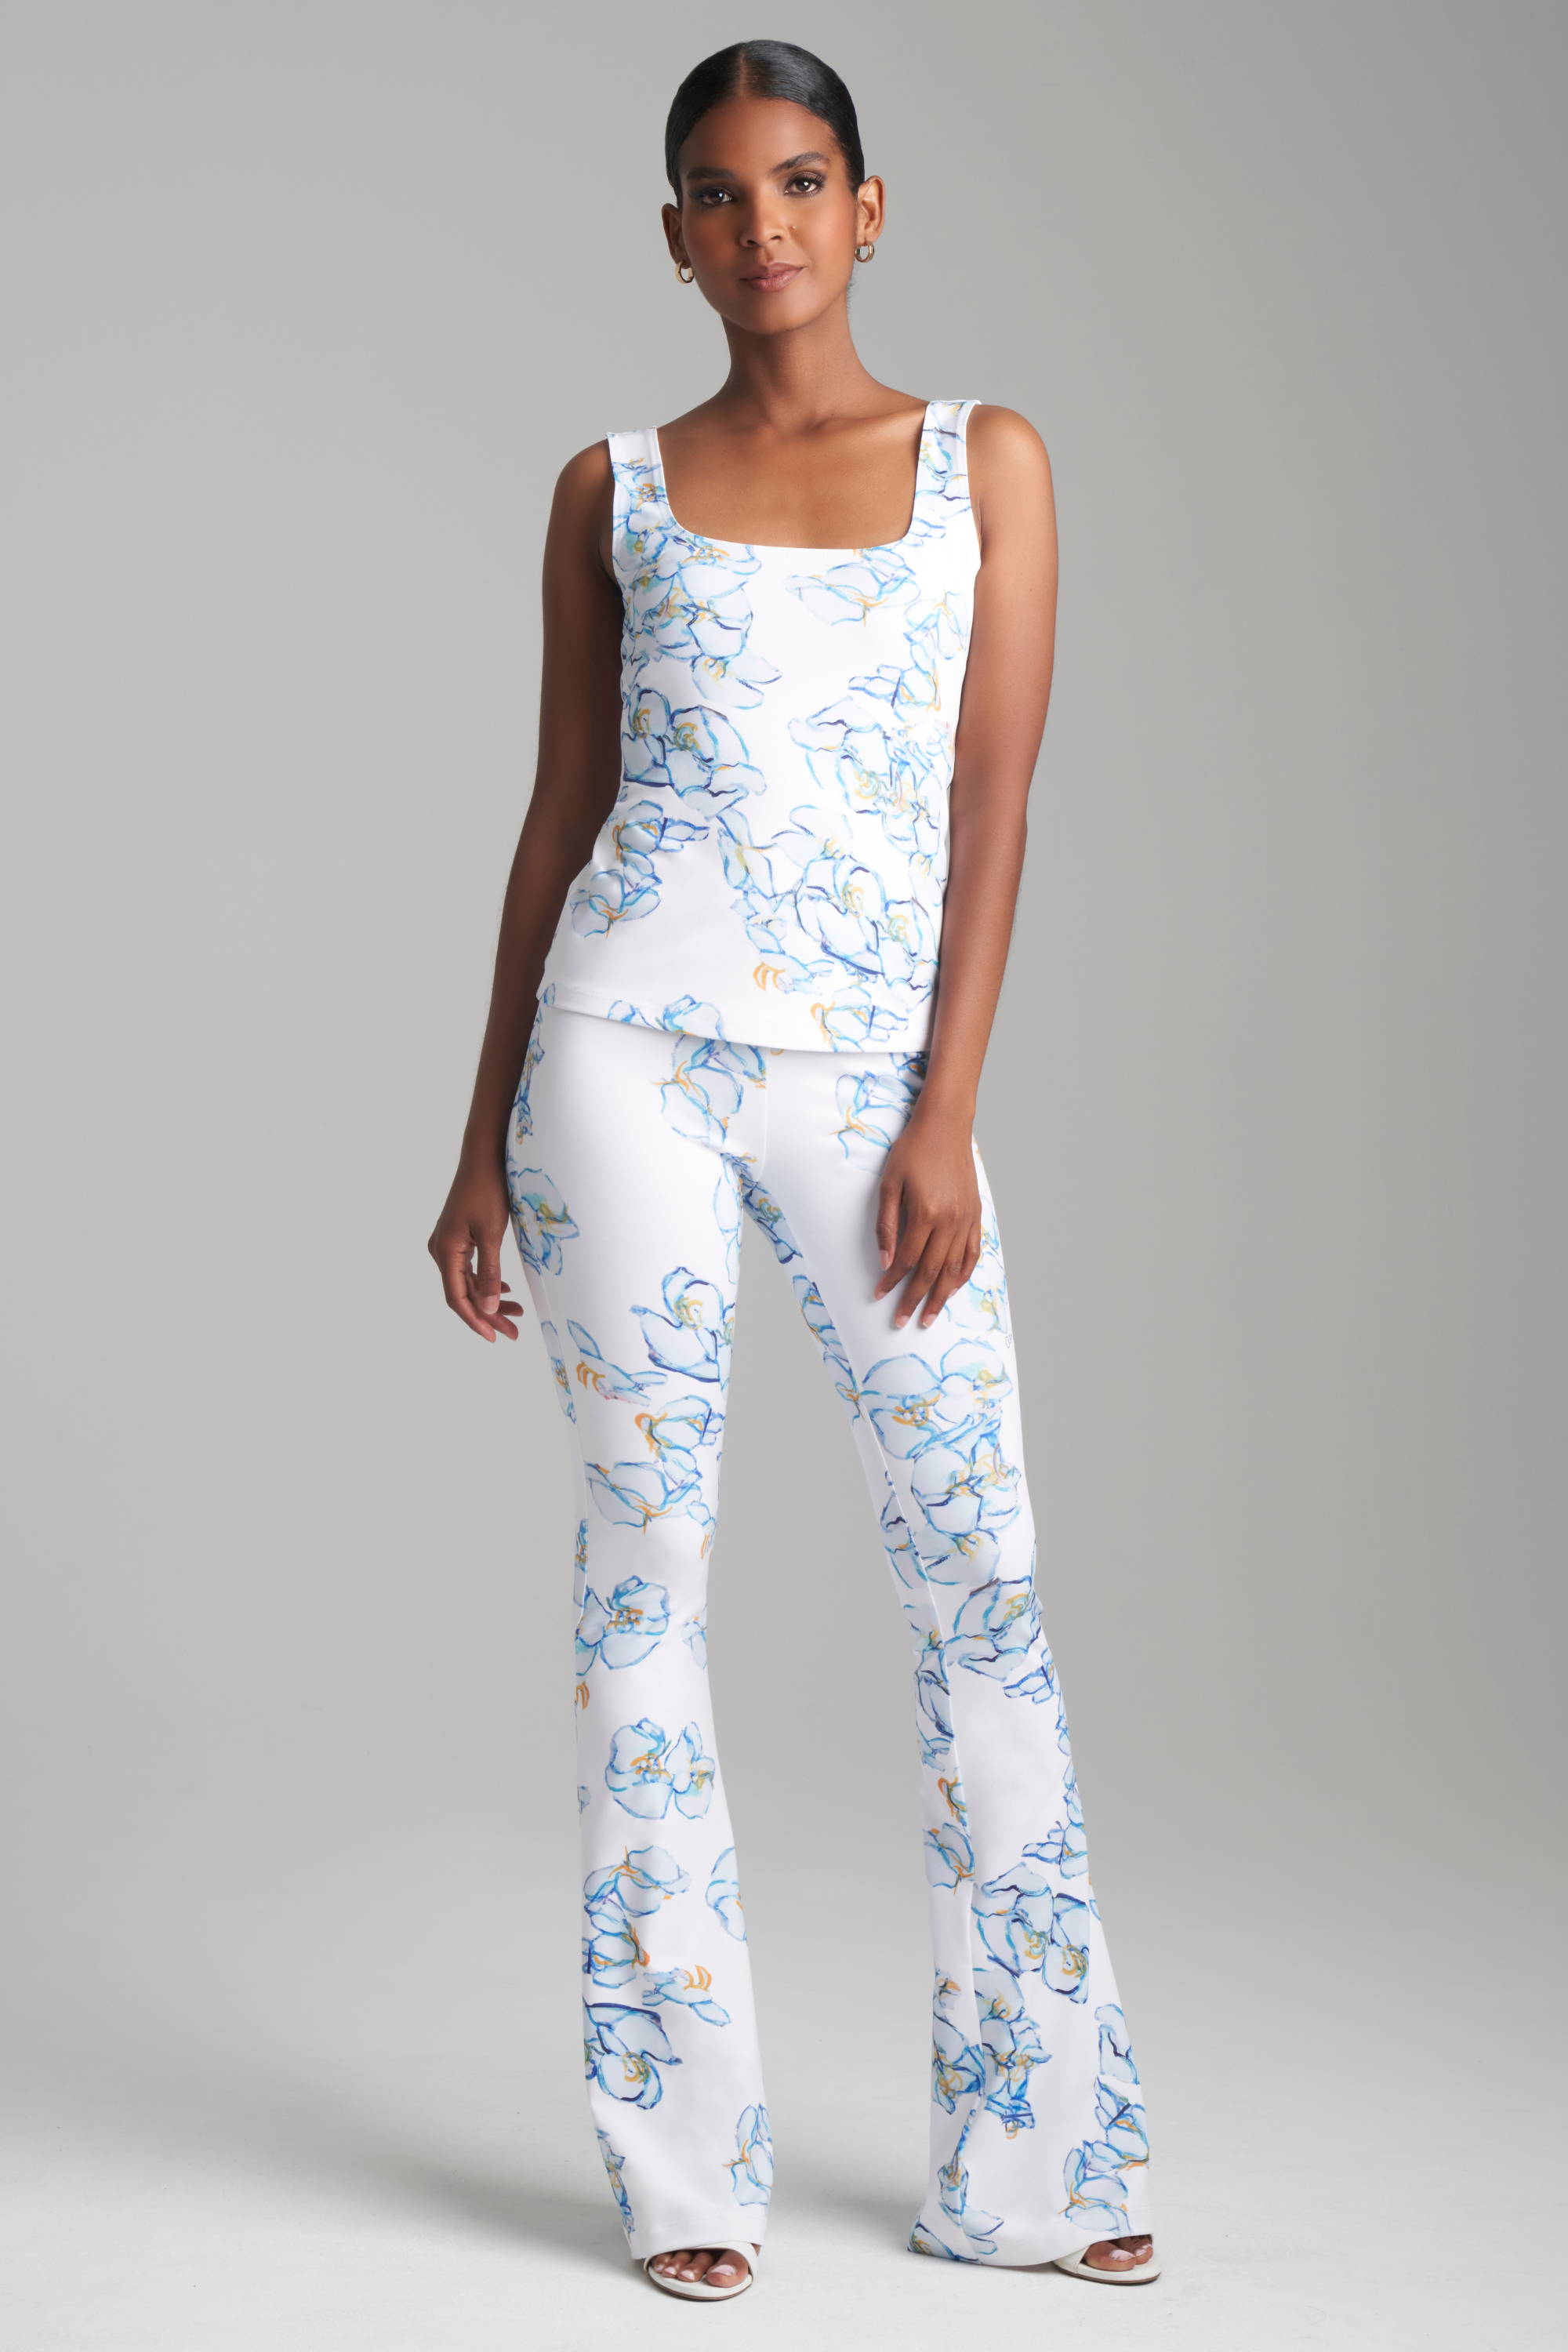 Woman wearing matching floral printed stretch knit tank top and pants by Ala von Auersperg